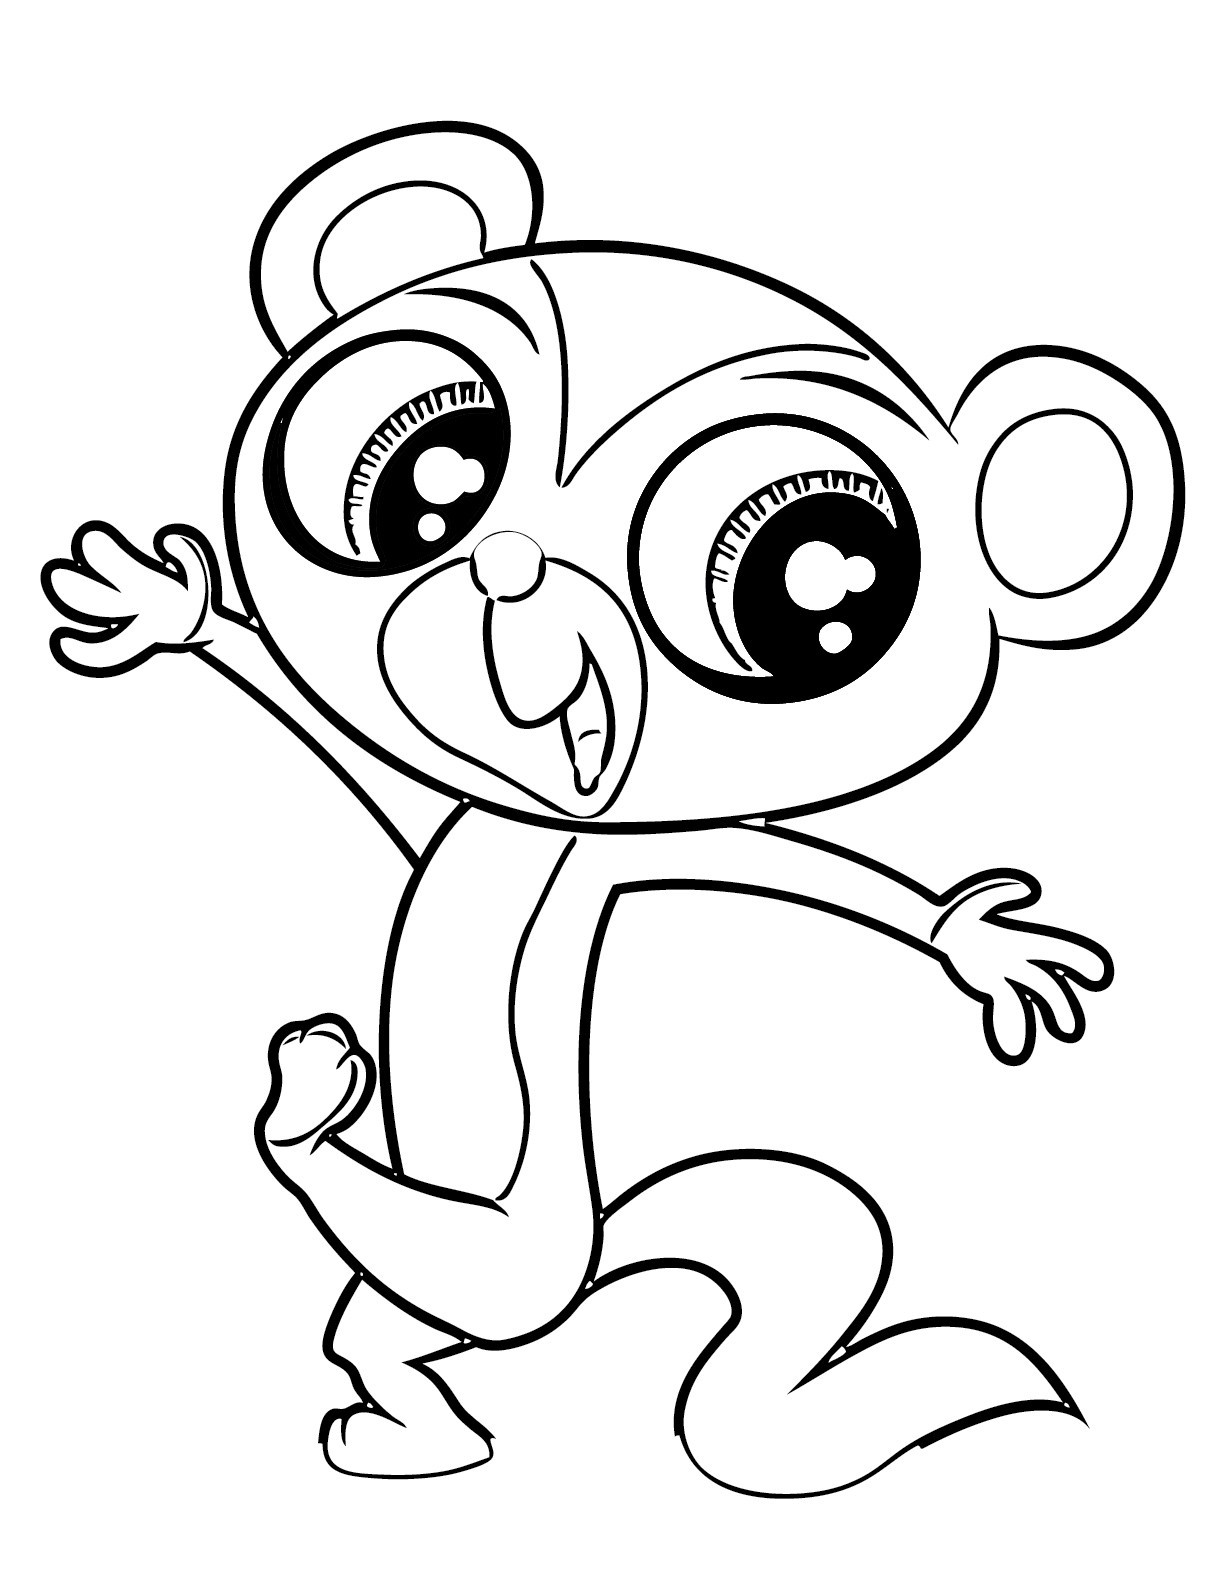 Chinook Salmon Coloring Page New Profitable Coloring Pages Littlest Pet Shop Animals Lps 8406 Stock